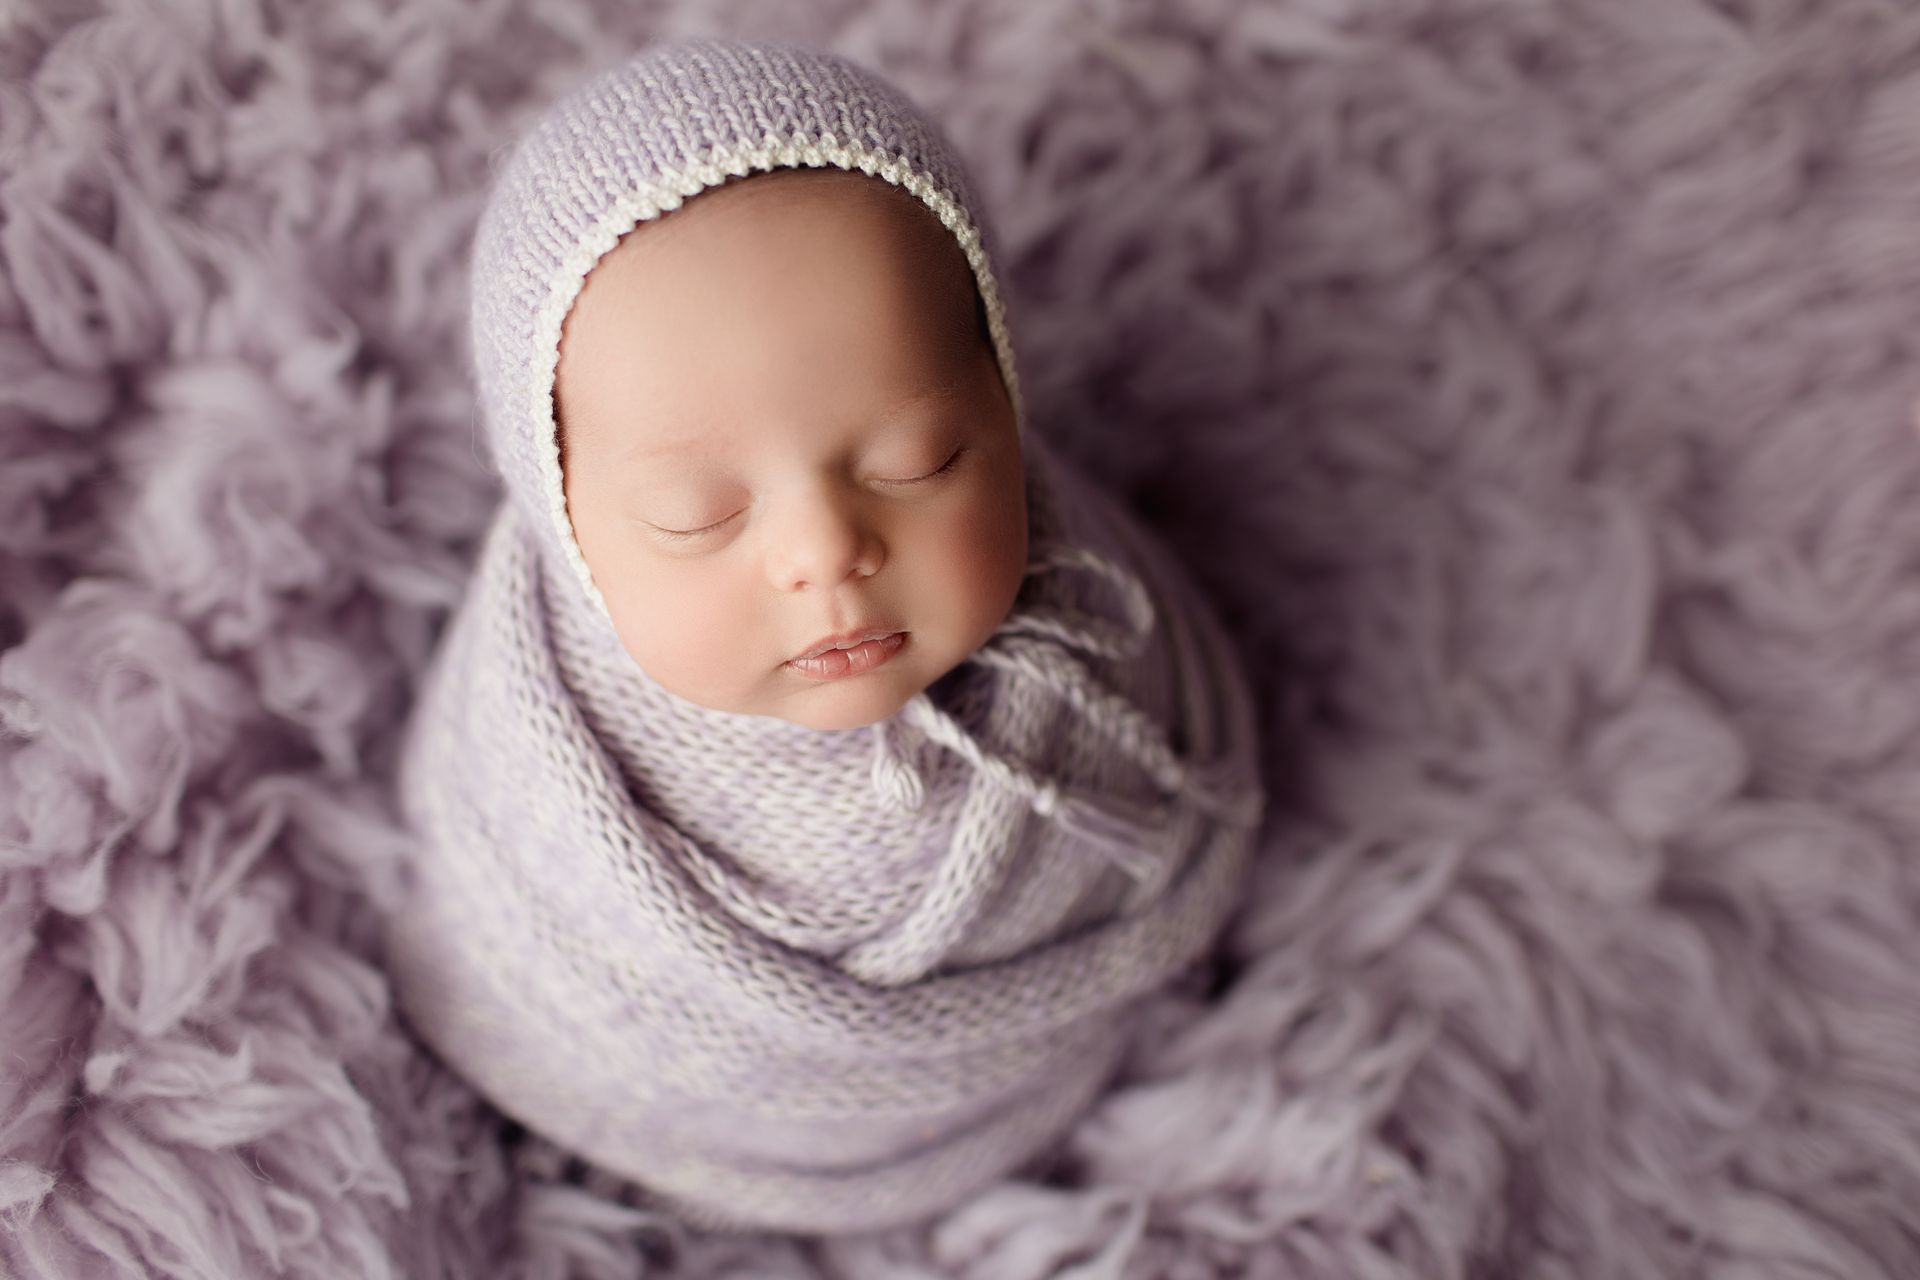 A newborn baby is wrapped in a purple blanket and wearing a hat.